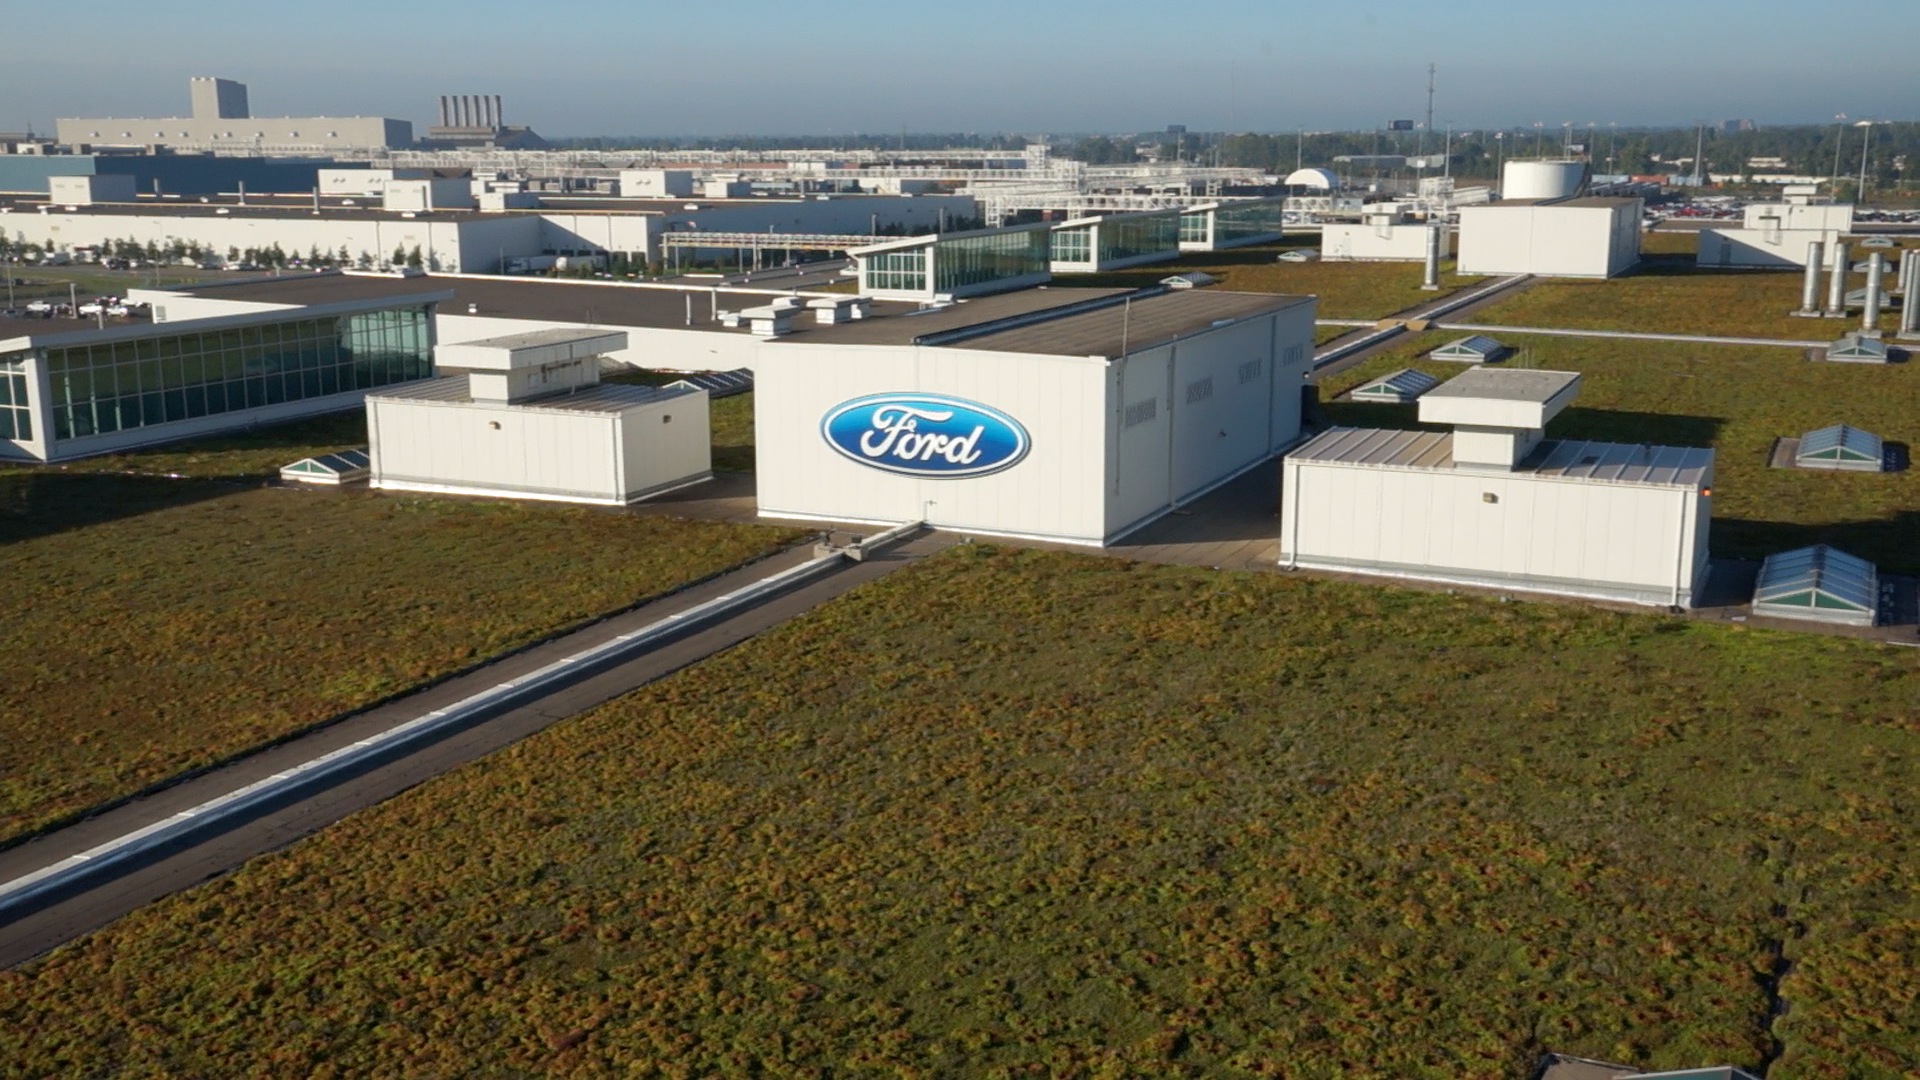 North America’s largest living roof – about the size of eight football fields – continues to flourish atop Dearborn Truck Plant’s final assembly building, part of the Ford Rouge Center. Photo: Courtesy Ford Motor Company